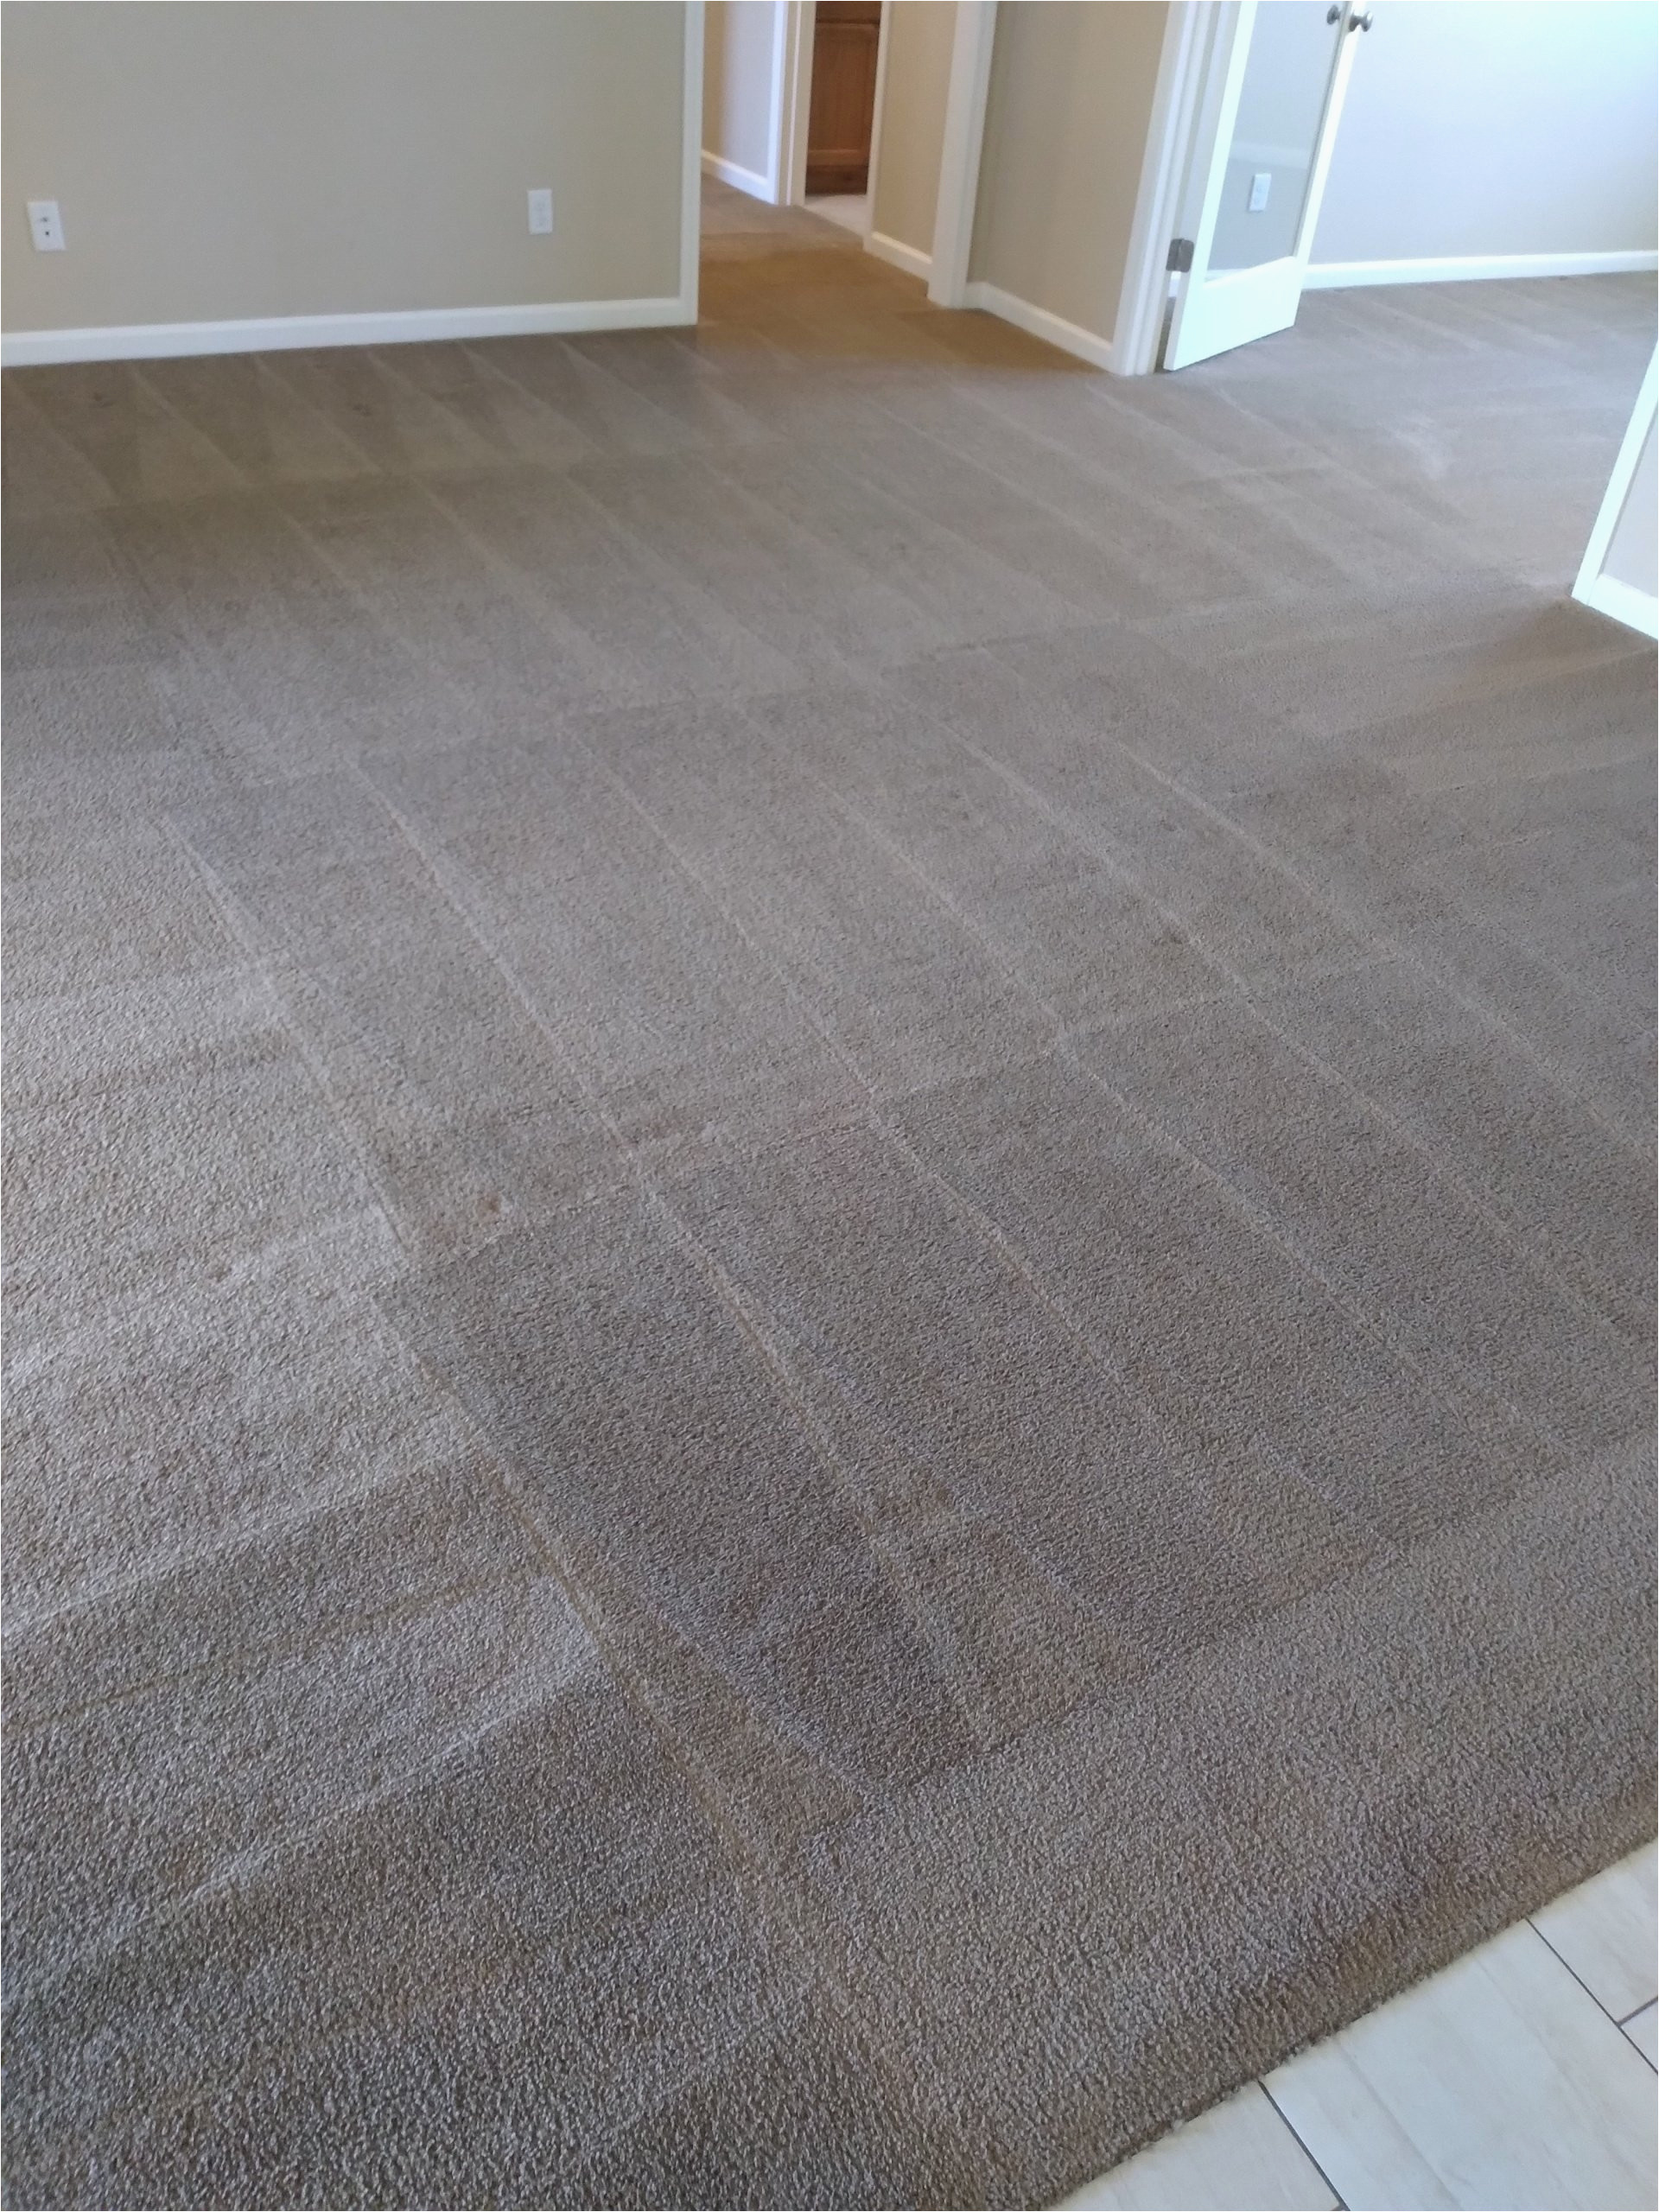 Area Rug Cleaning Chico Ca Carpet Cleaning Services Chico, Ca Bio Kleen Carpet and …